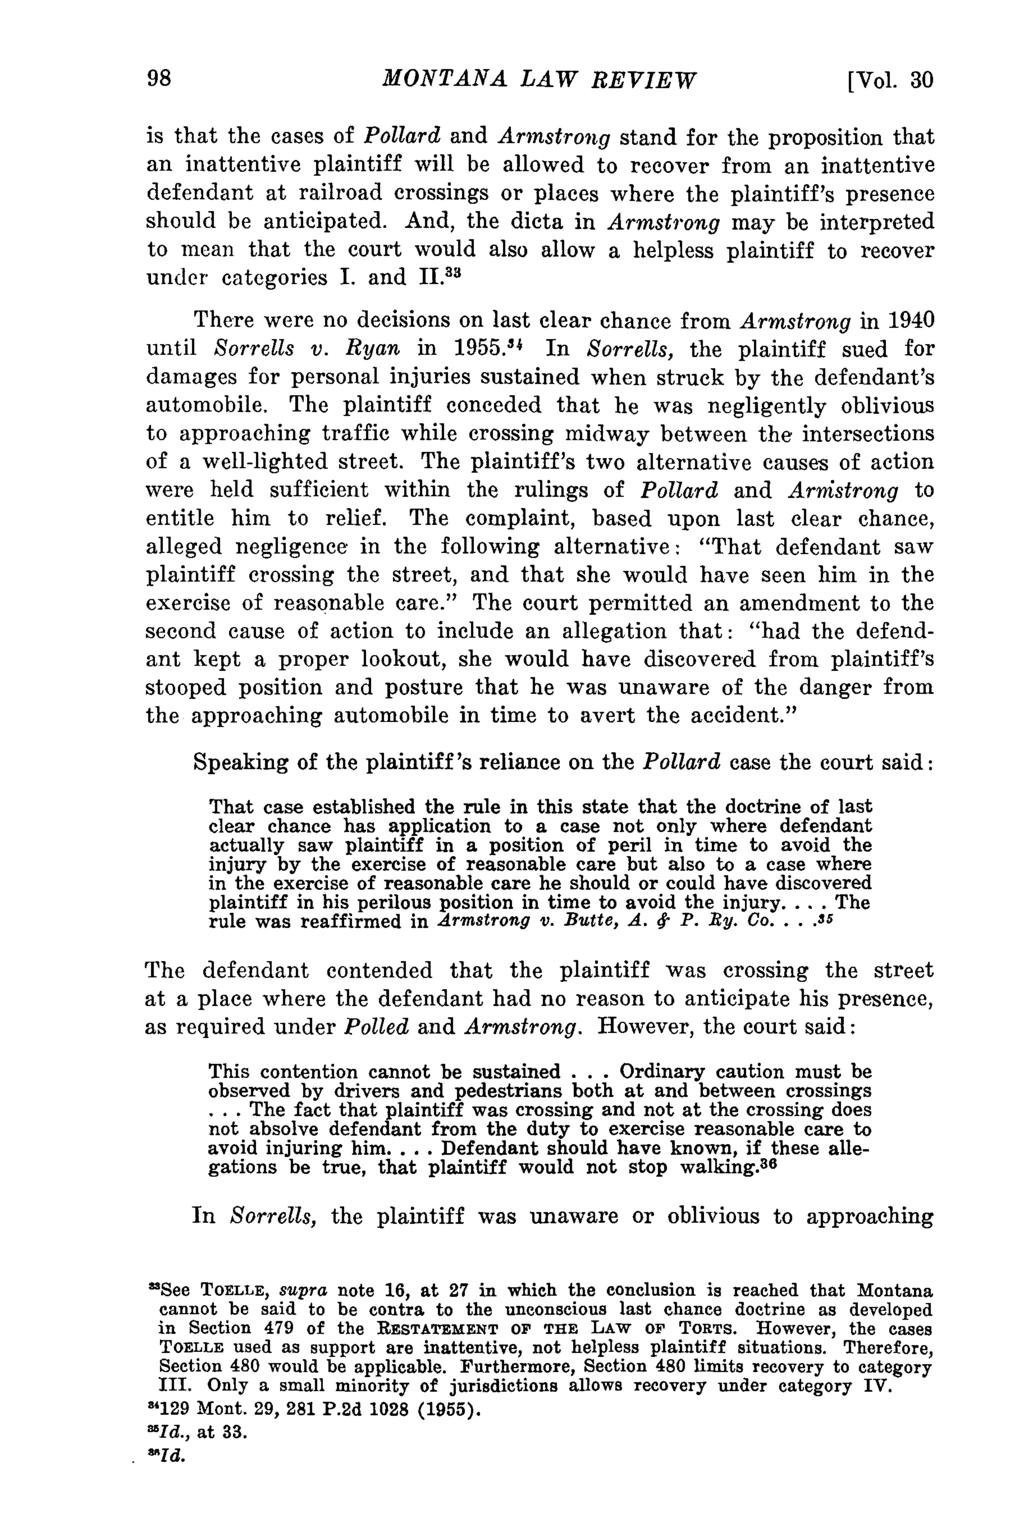 Montana Law Review, Vol. 30 [1968], Iss. 1, Art. 8 MONTANA LAW REVIEW [Vol.